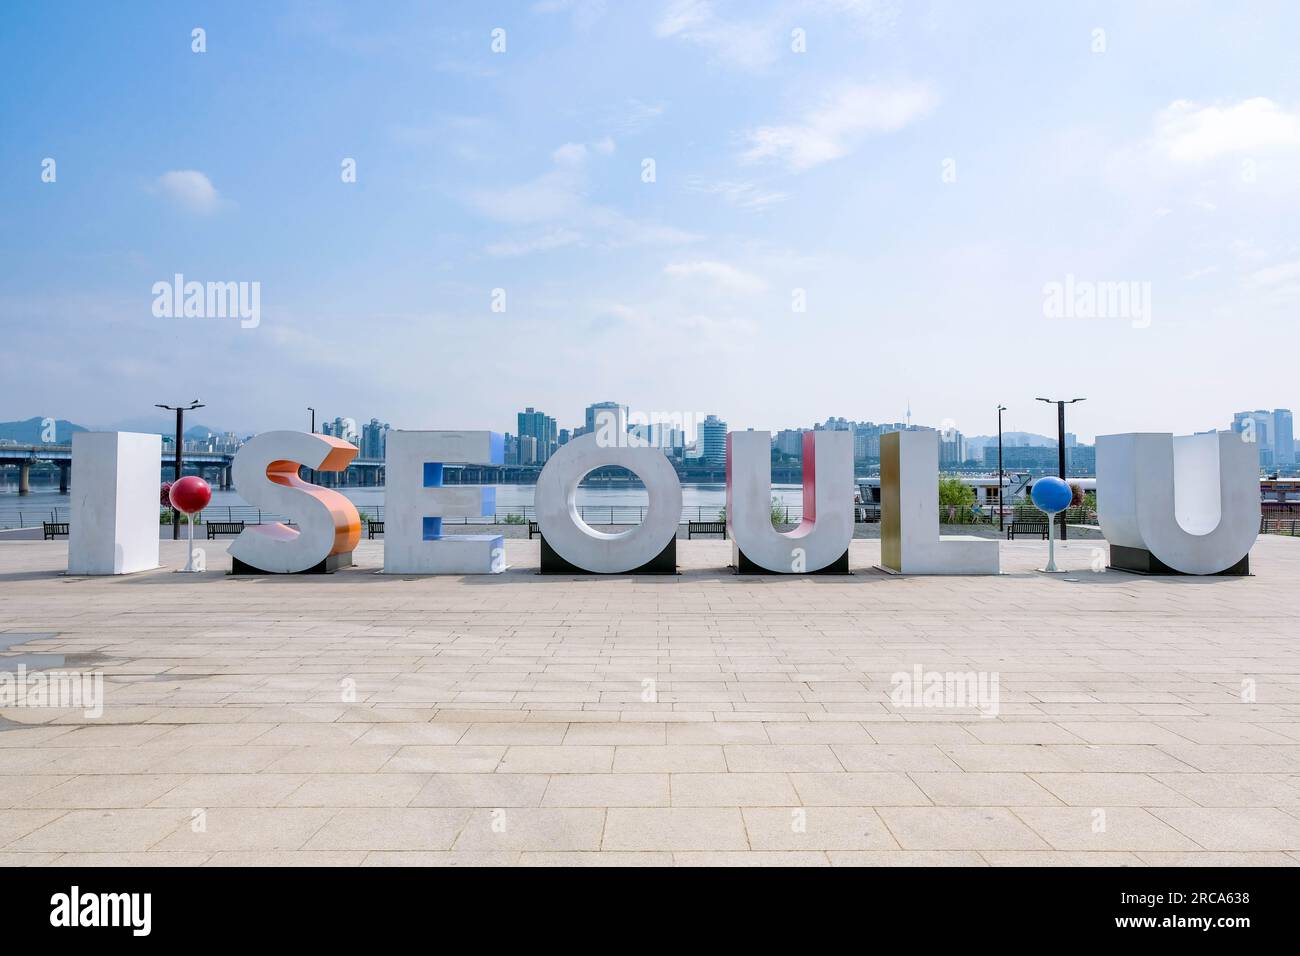 Seoul, South Korea - 11 July 2022: I Seoul U signage at Yeouido Hangang Park, one of the parks next to Han river Stock Photo